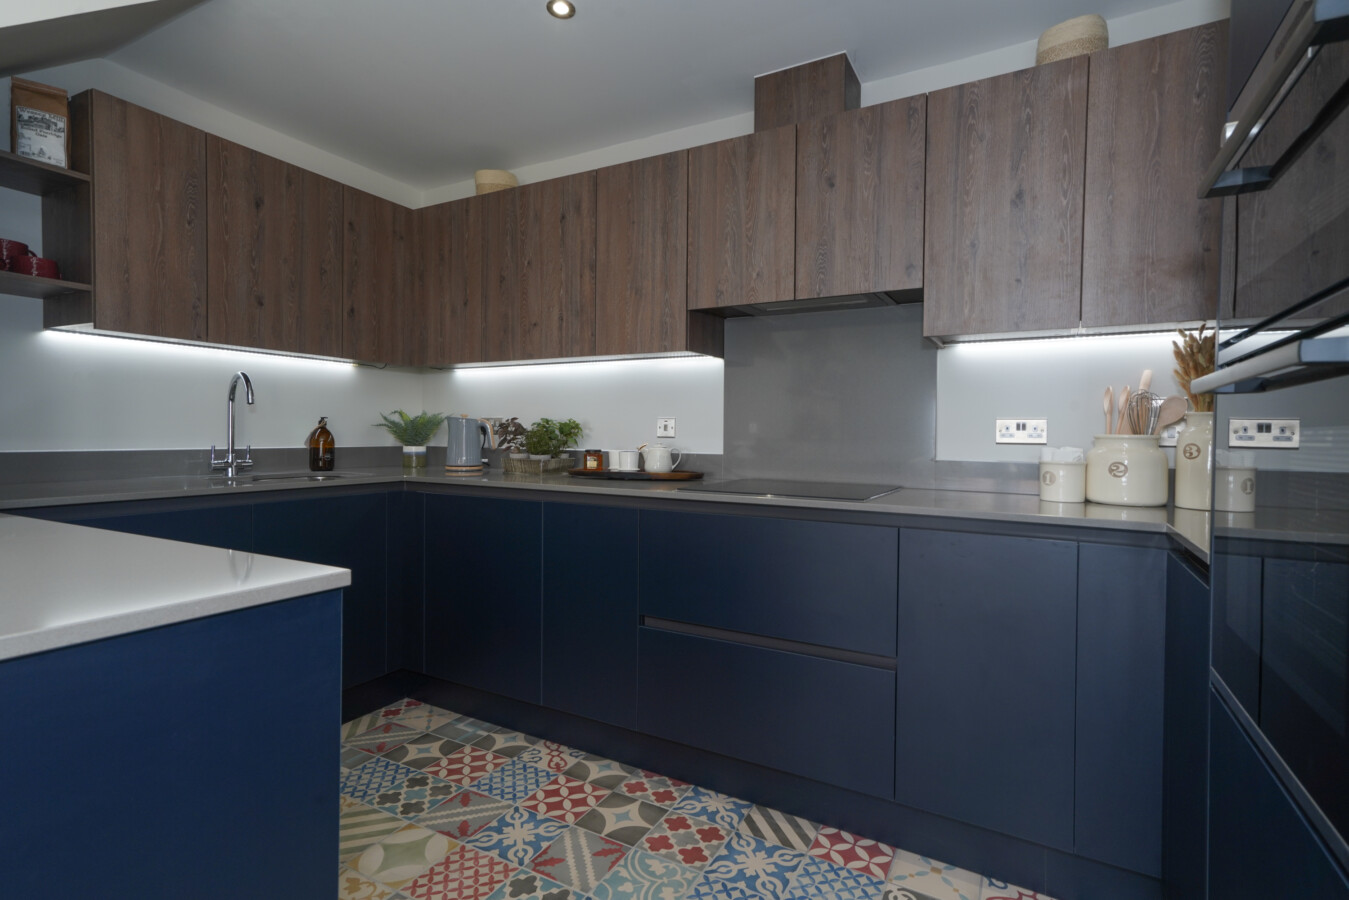 Pye Homes Appoints Wiltshire-based Manor Interiors to Supply Handmade Kitchens